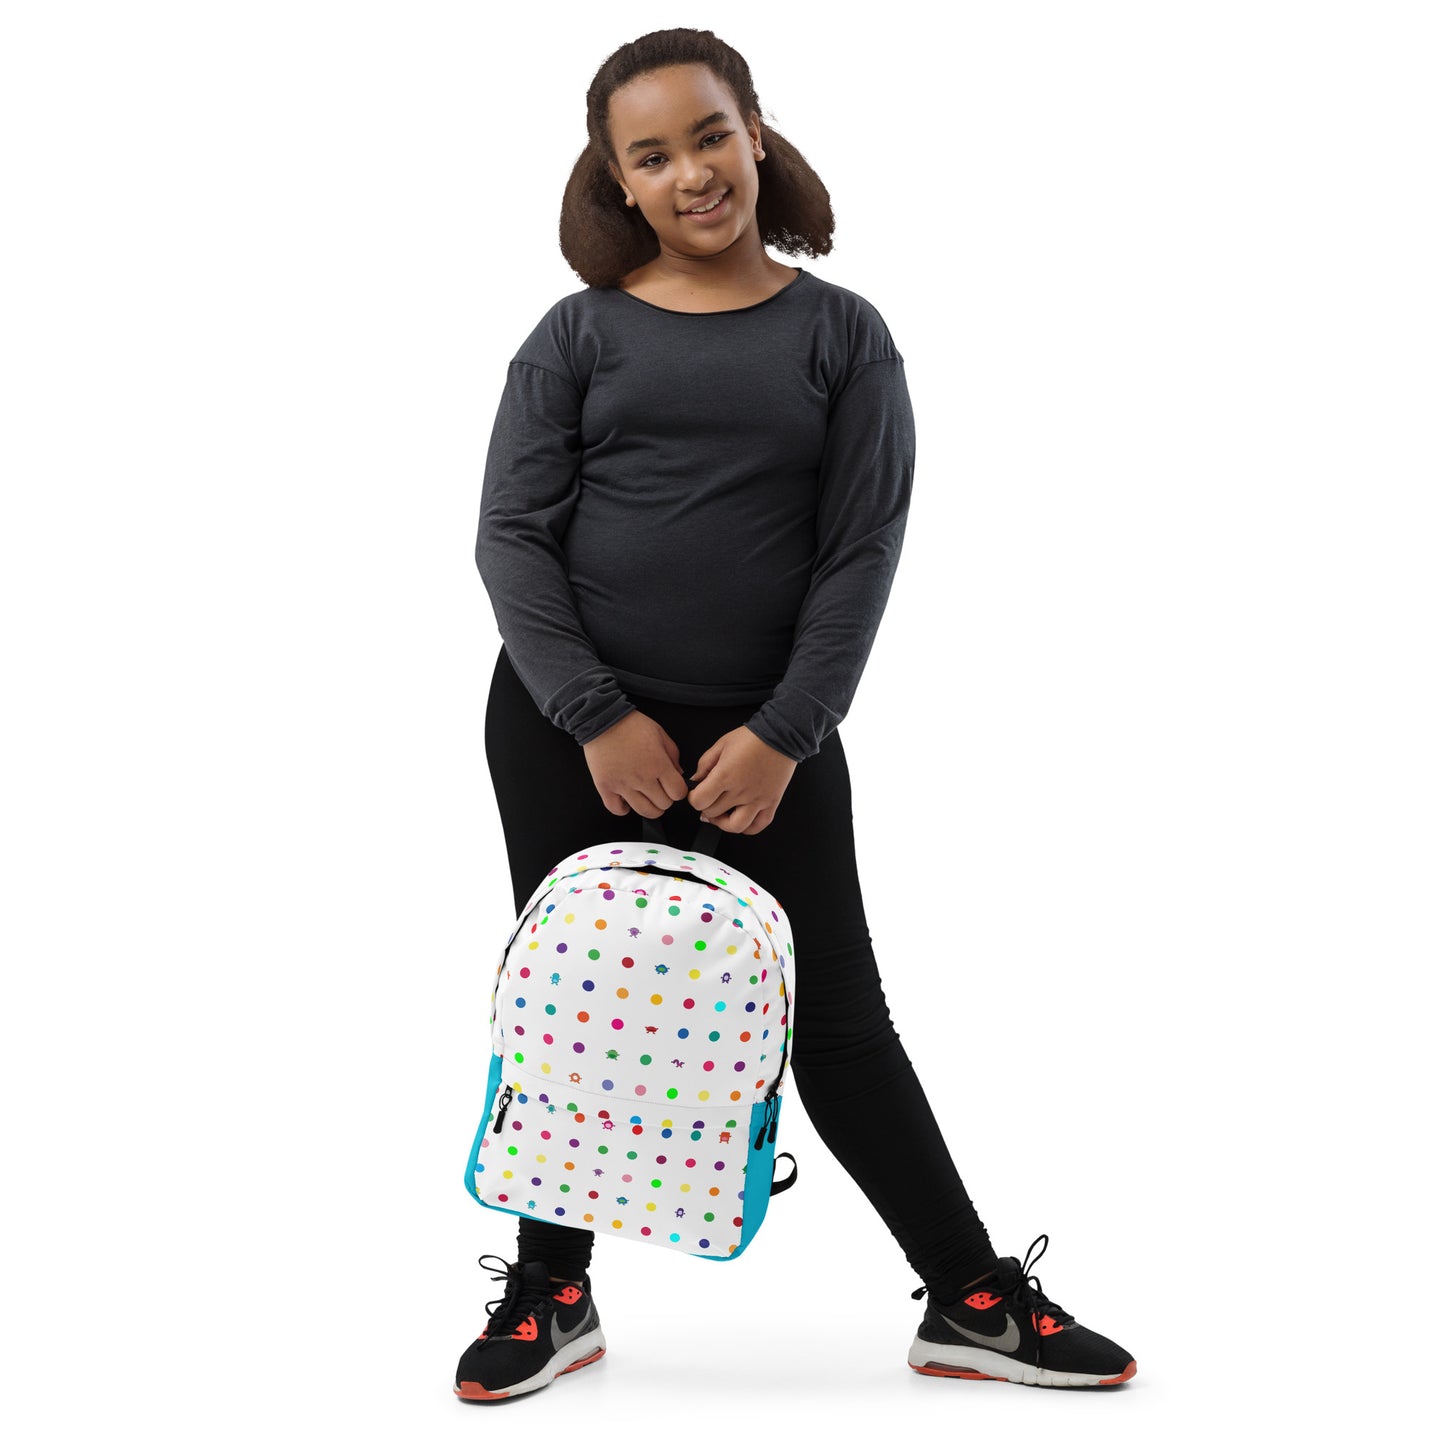 White Turquoise Small Dot Monster Backpack with zip pocket teen tween girl 